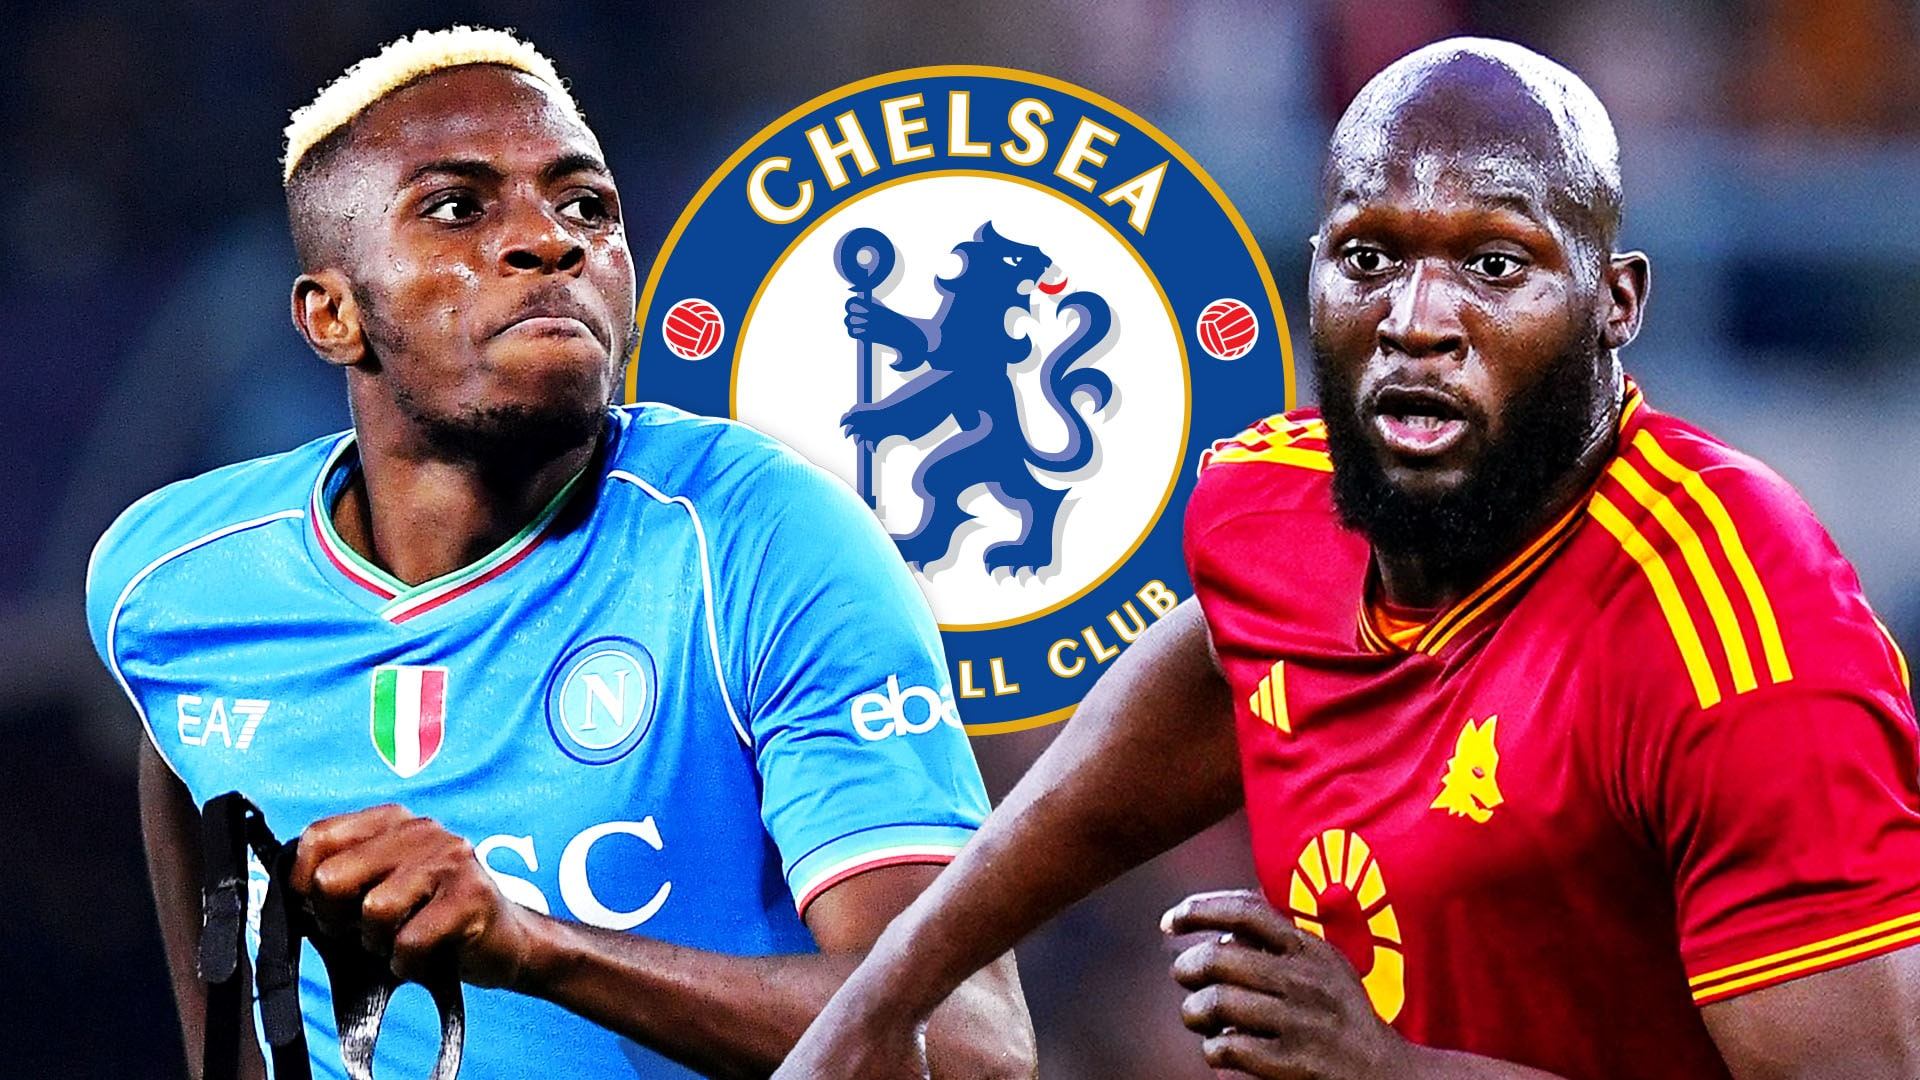 Napoli and Chelsea negotiate swap deal for Lukaku and Osimhen